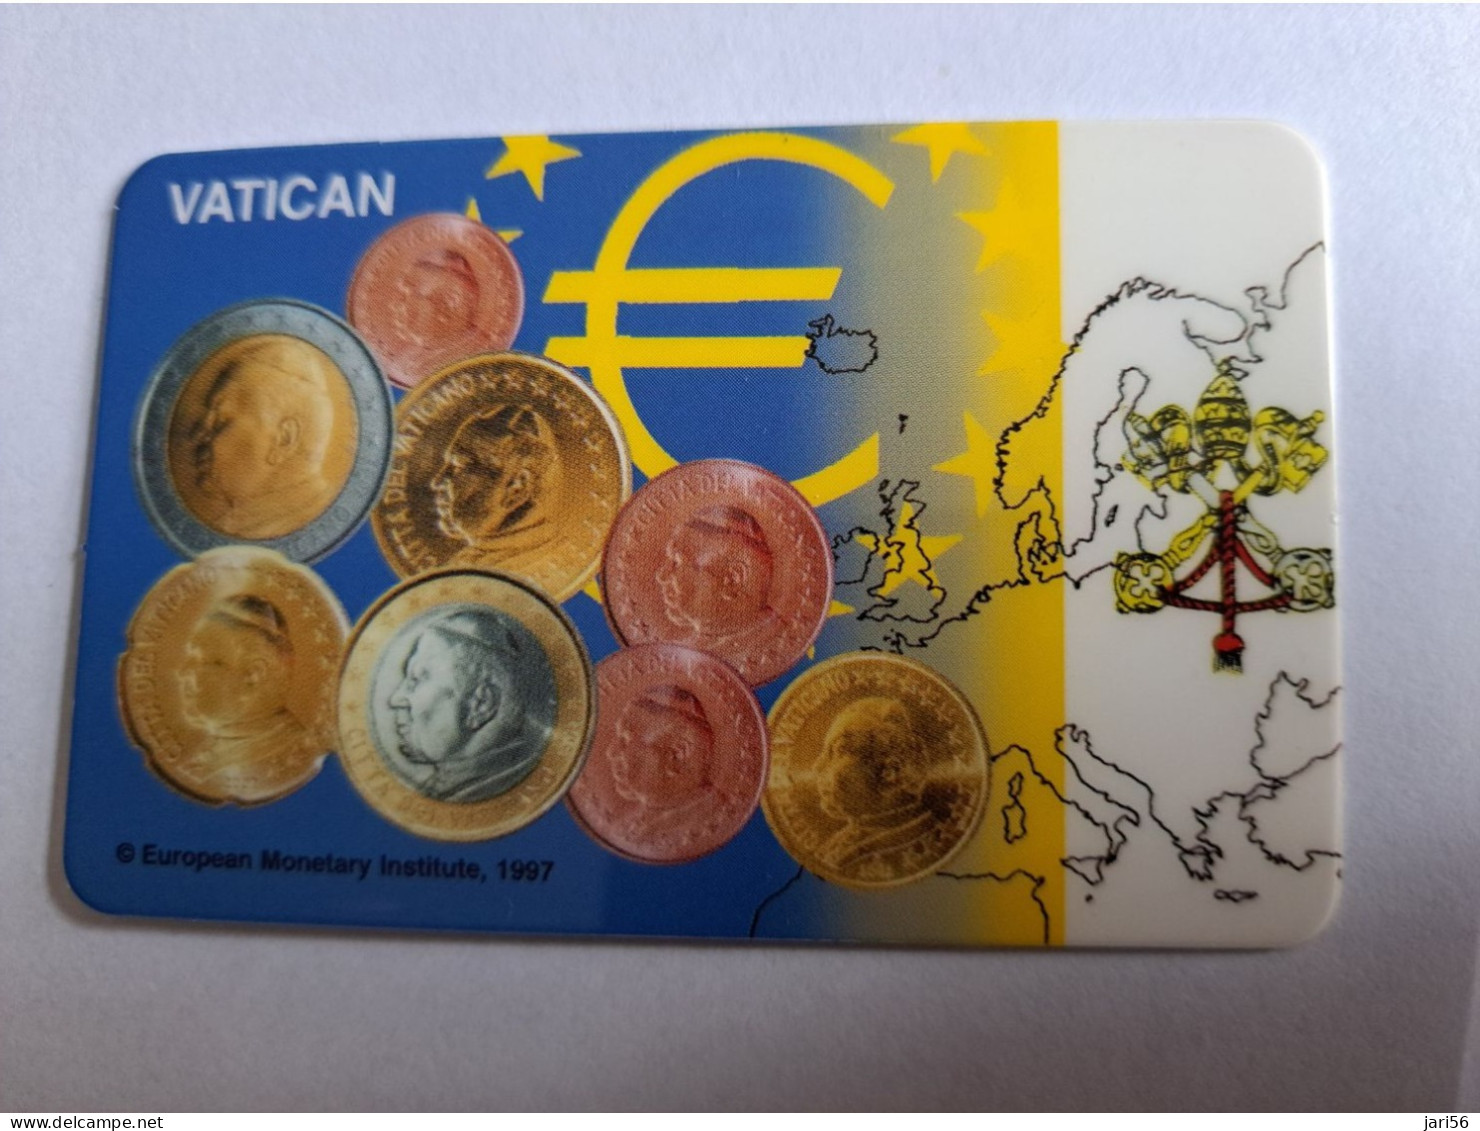 GREAT BRITAIN   20 UNITS   / EURO COINS/ VATICAN       PHONECARD   (date 12/ 2002)  PREPAID CARD / MINT      **12917** - [10] Collections